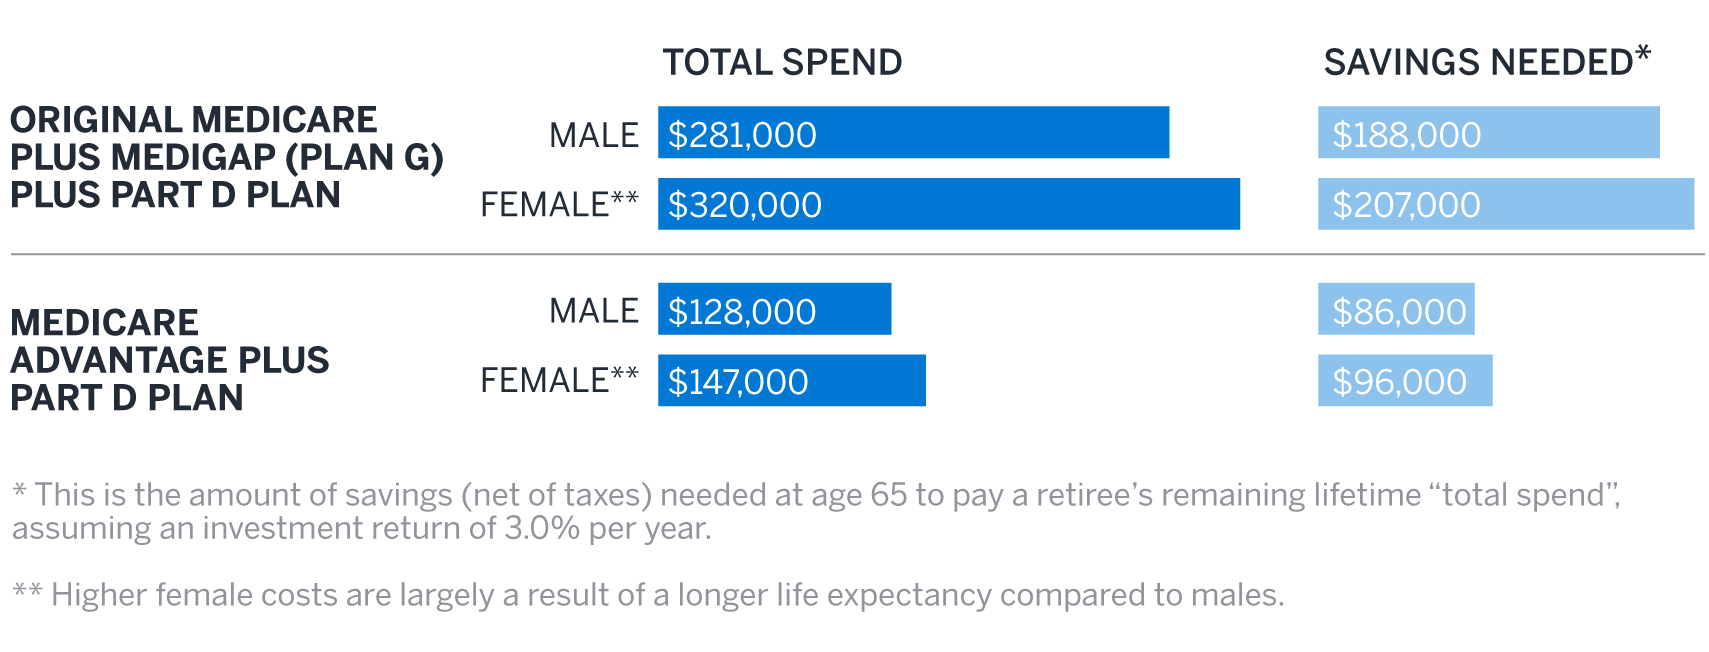 Figure 1: Projected Remaining Lifetime Healthcare Expenses for a Healthy 65-Year-Old Retiring in 2024